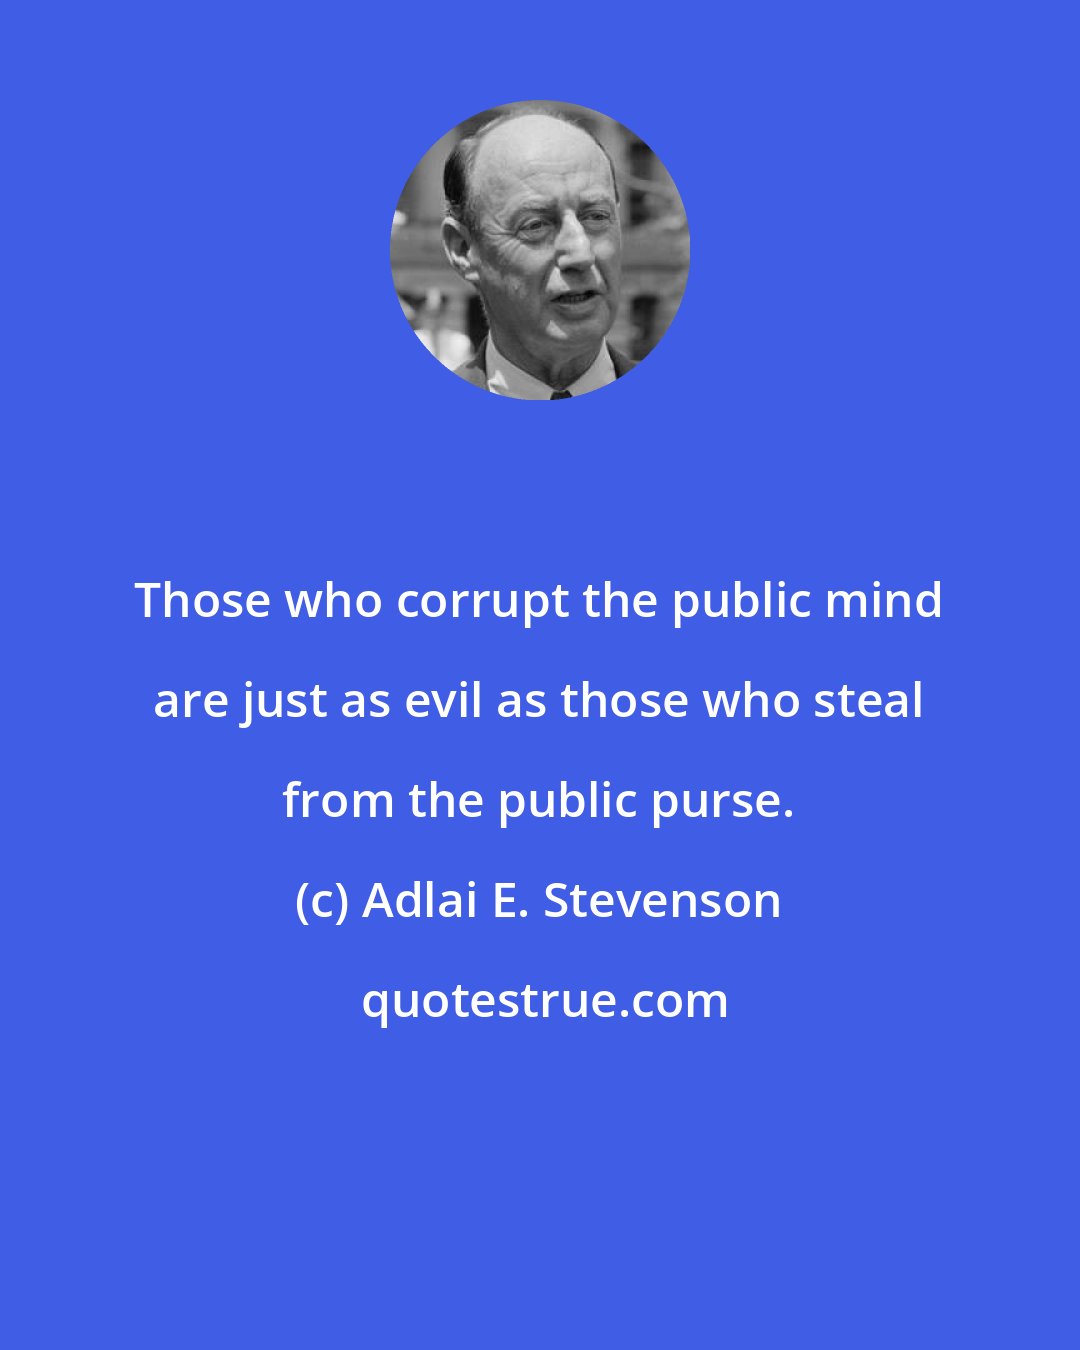 Adlai E. Stevenson: Those who corrupt the public mind are just as evil as those who steal from the public purse.